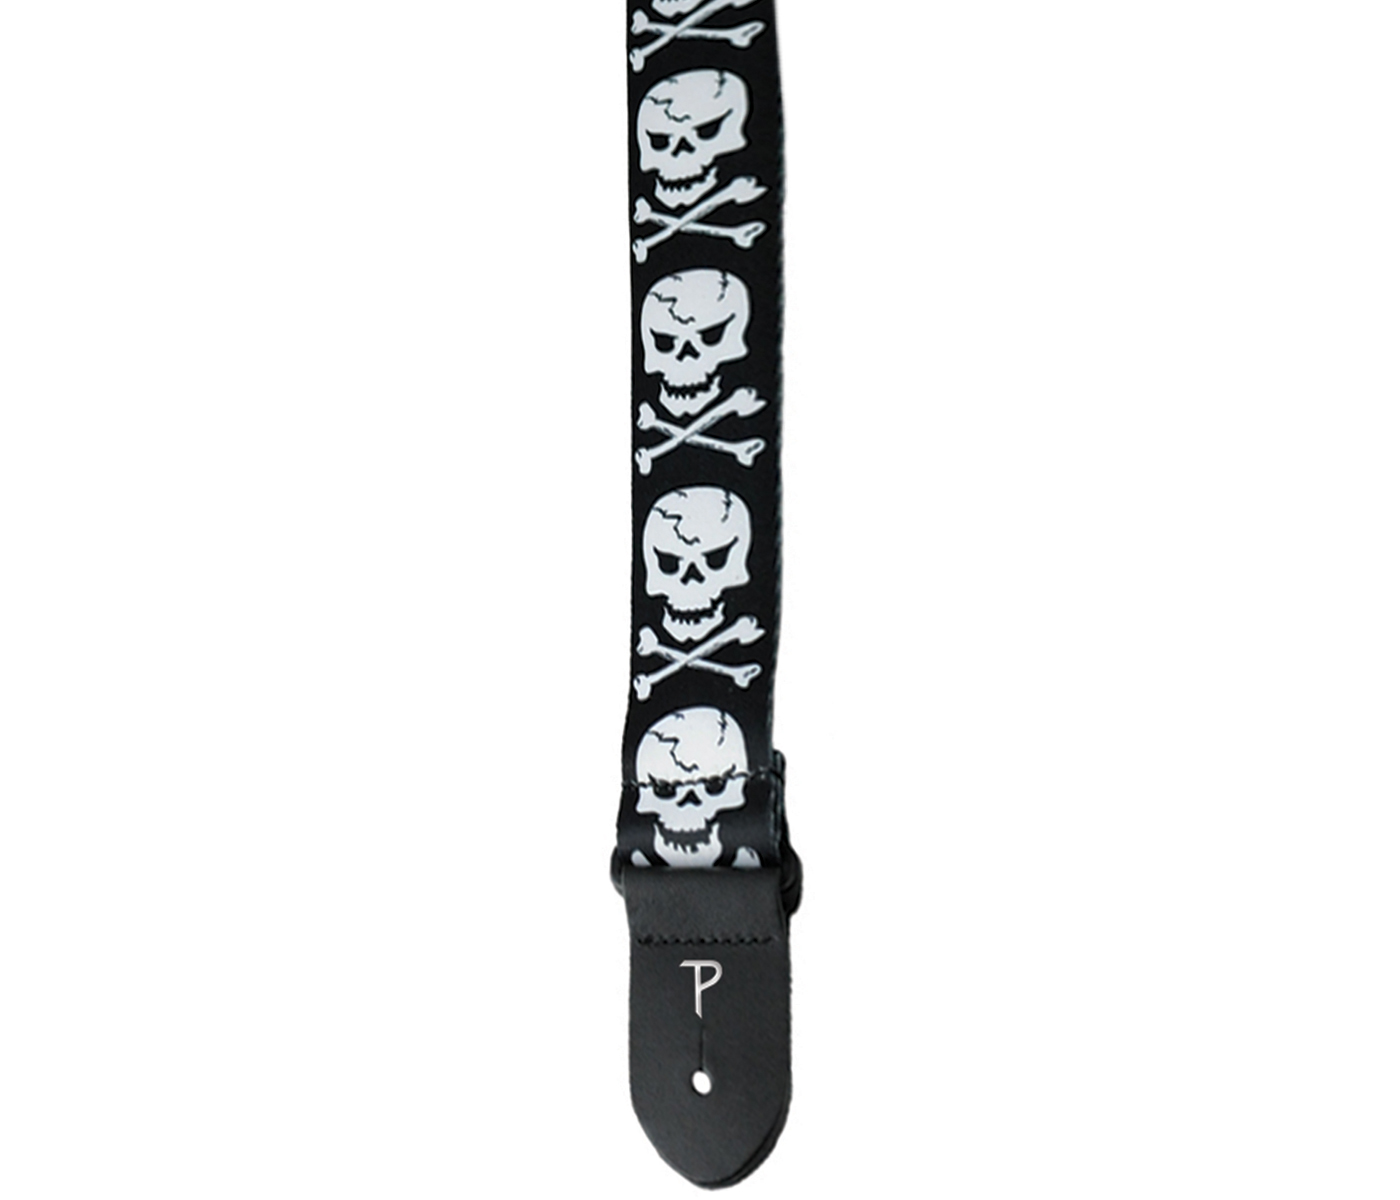 Guitar Strap Skull Pile Black Gray 2 Inches Wide 